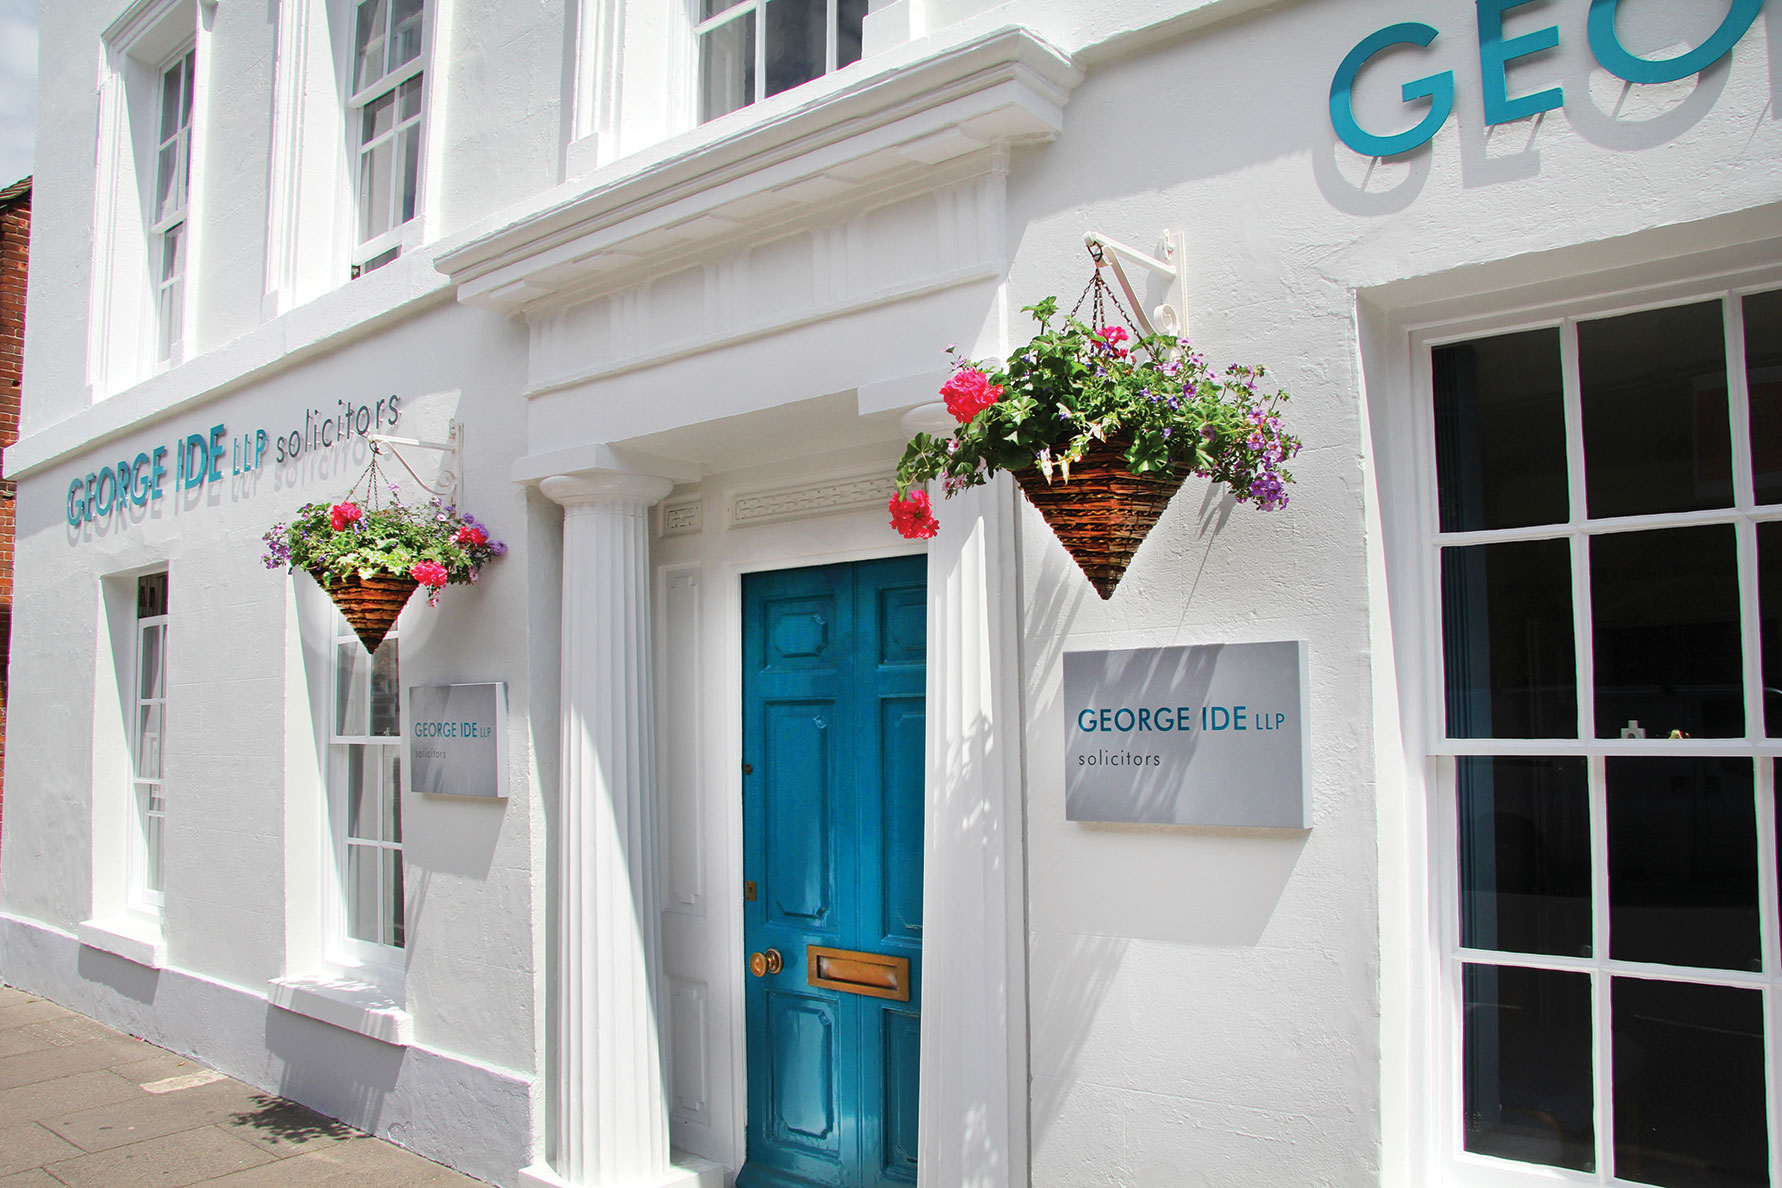 Main image for George Ide LLP